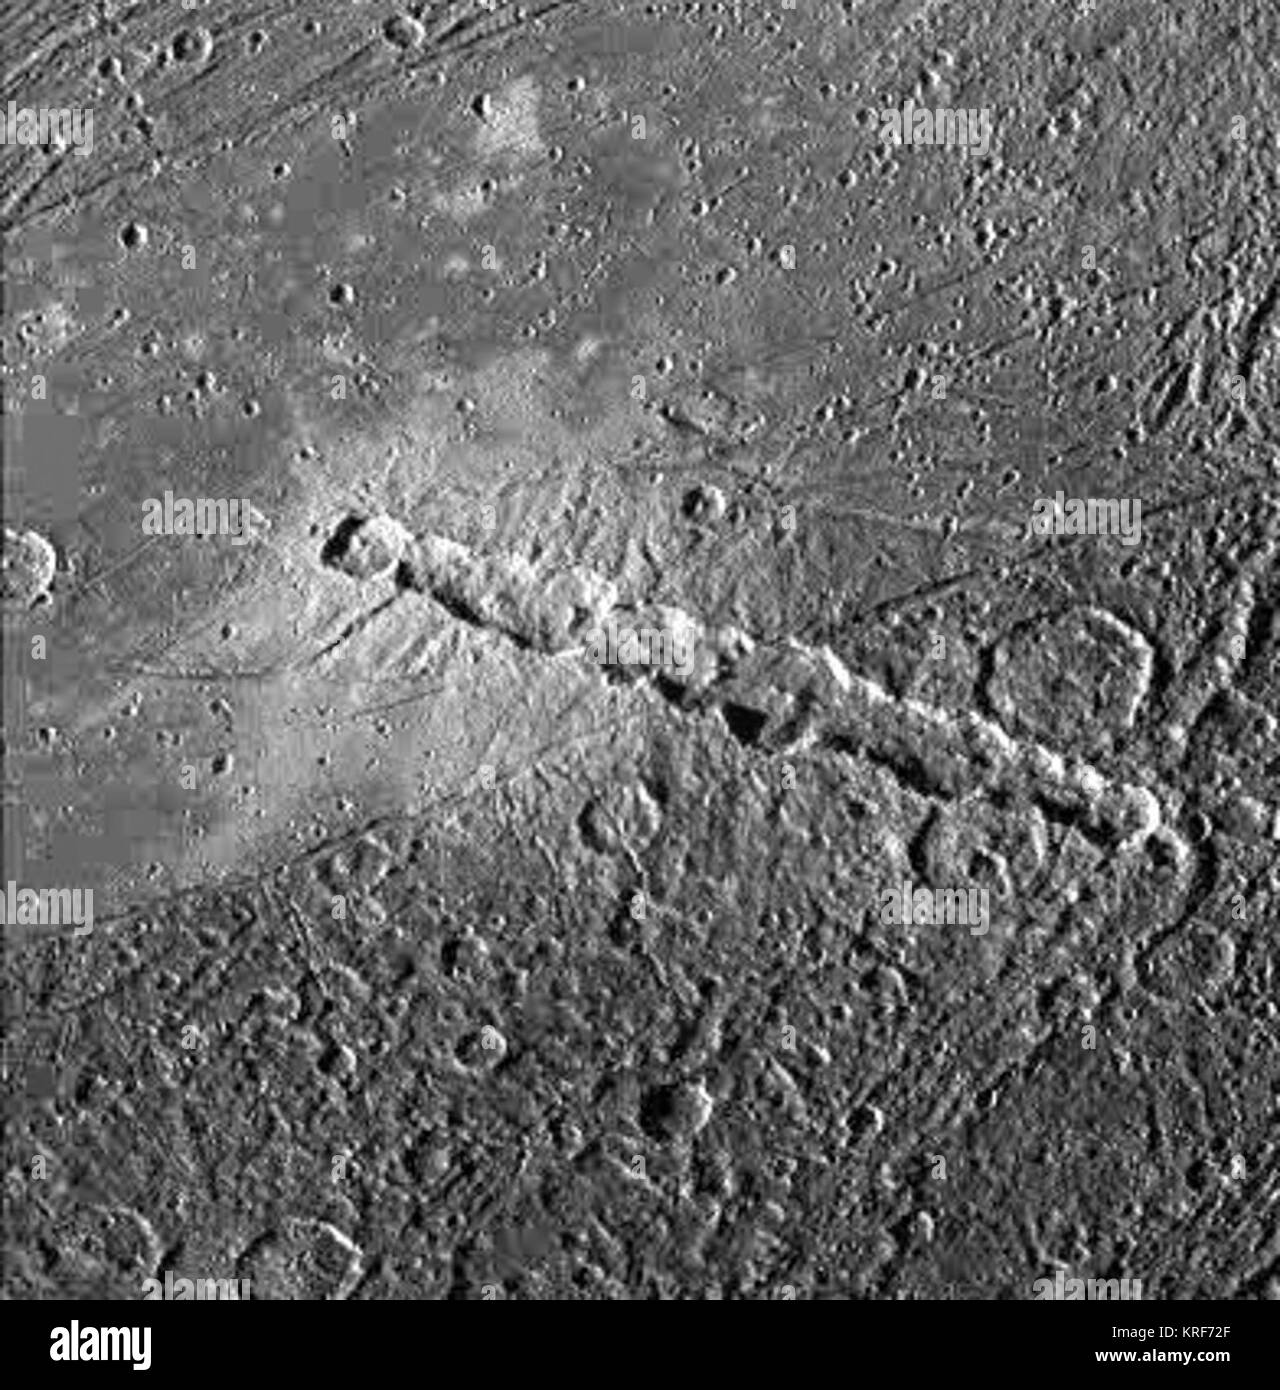 Chain of impact craters on Ganymede Stock Photo